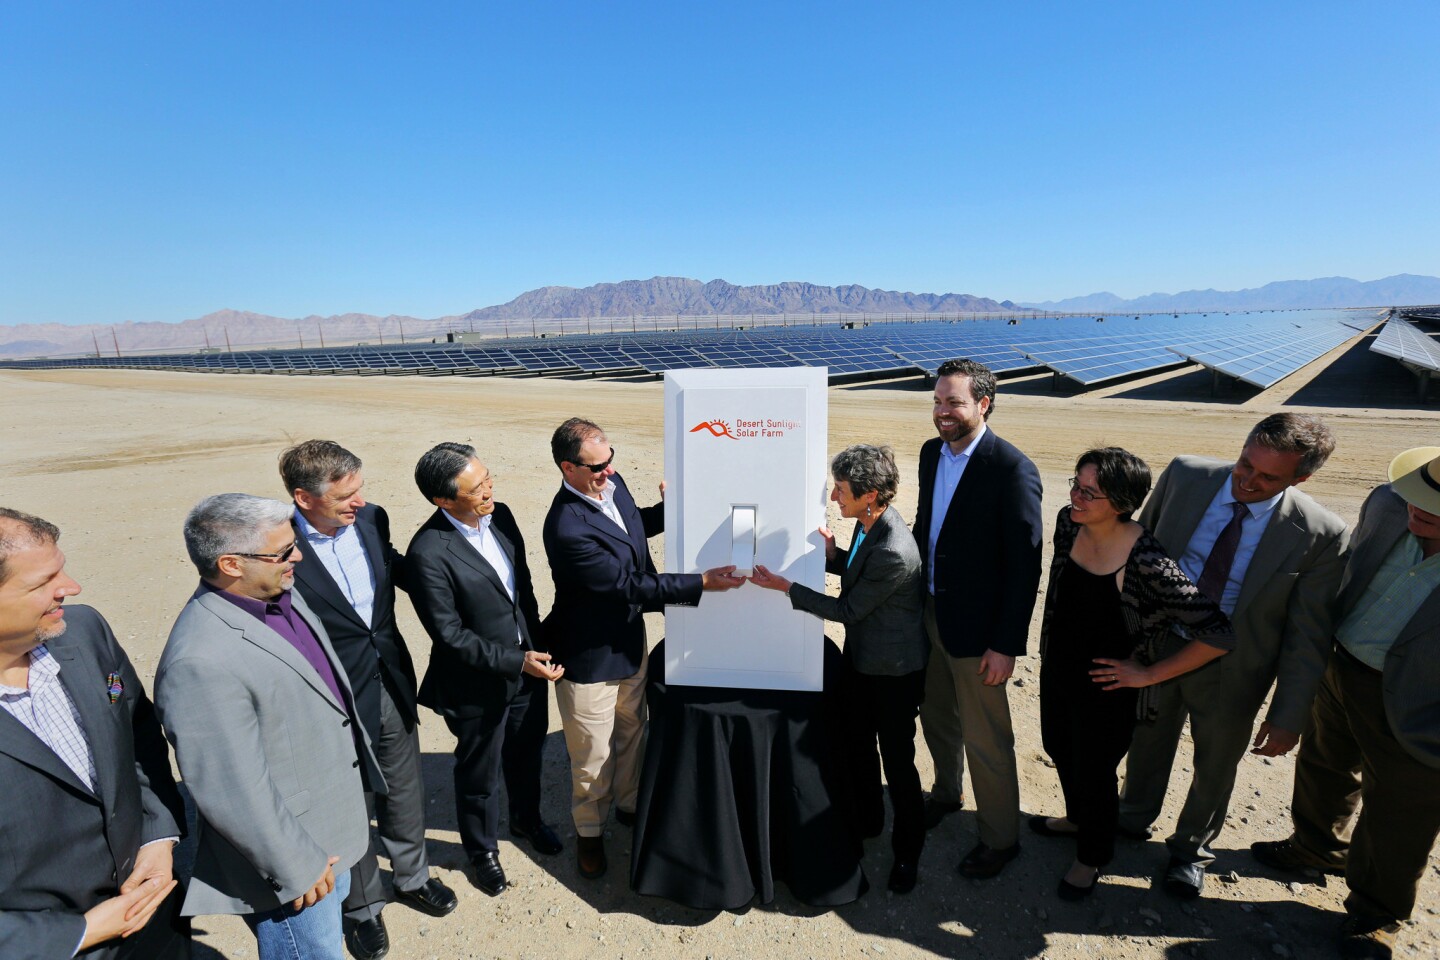 Armando Pimentel, President and CEO of NextEra Energy Resources, and U.S. of Interior Secretary Sally Jewell flip on a ceremonial power switch during a dedication ceremony for the new 550-megawatt Desert Sunlight solar farm on Feb. 9 in Riverside County.